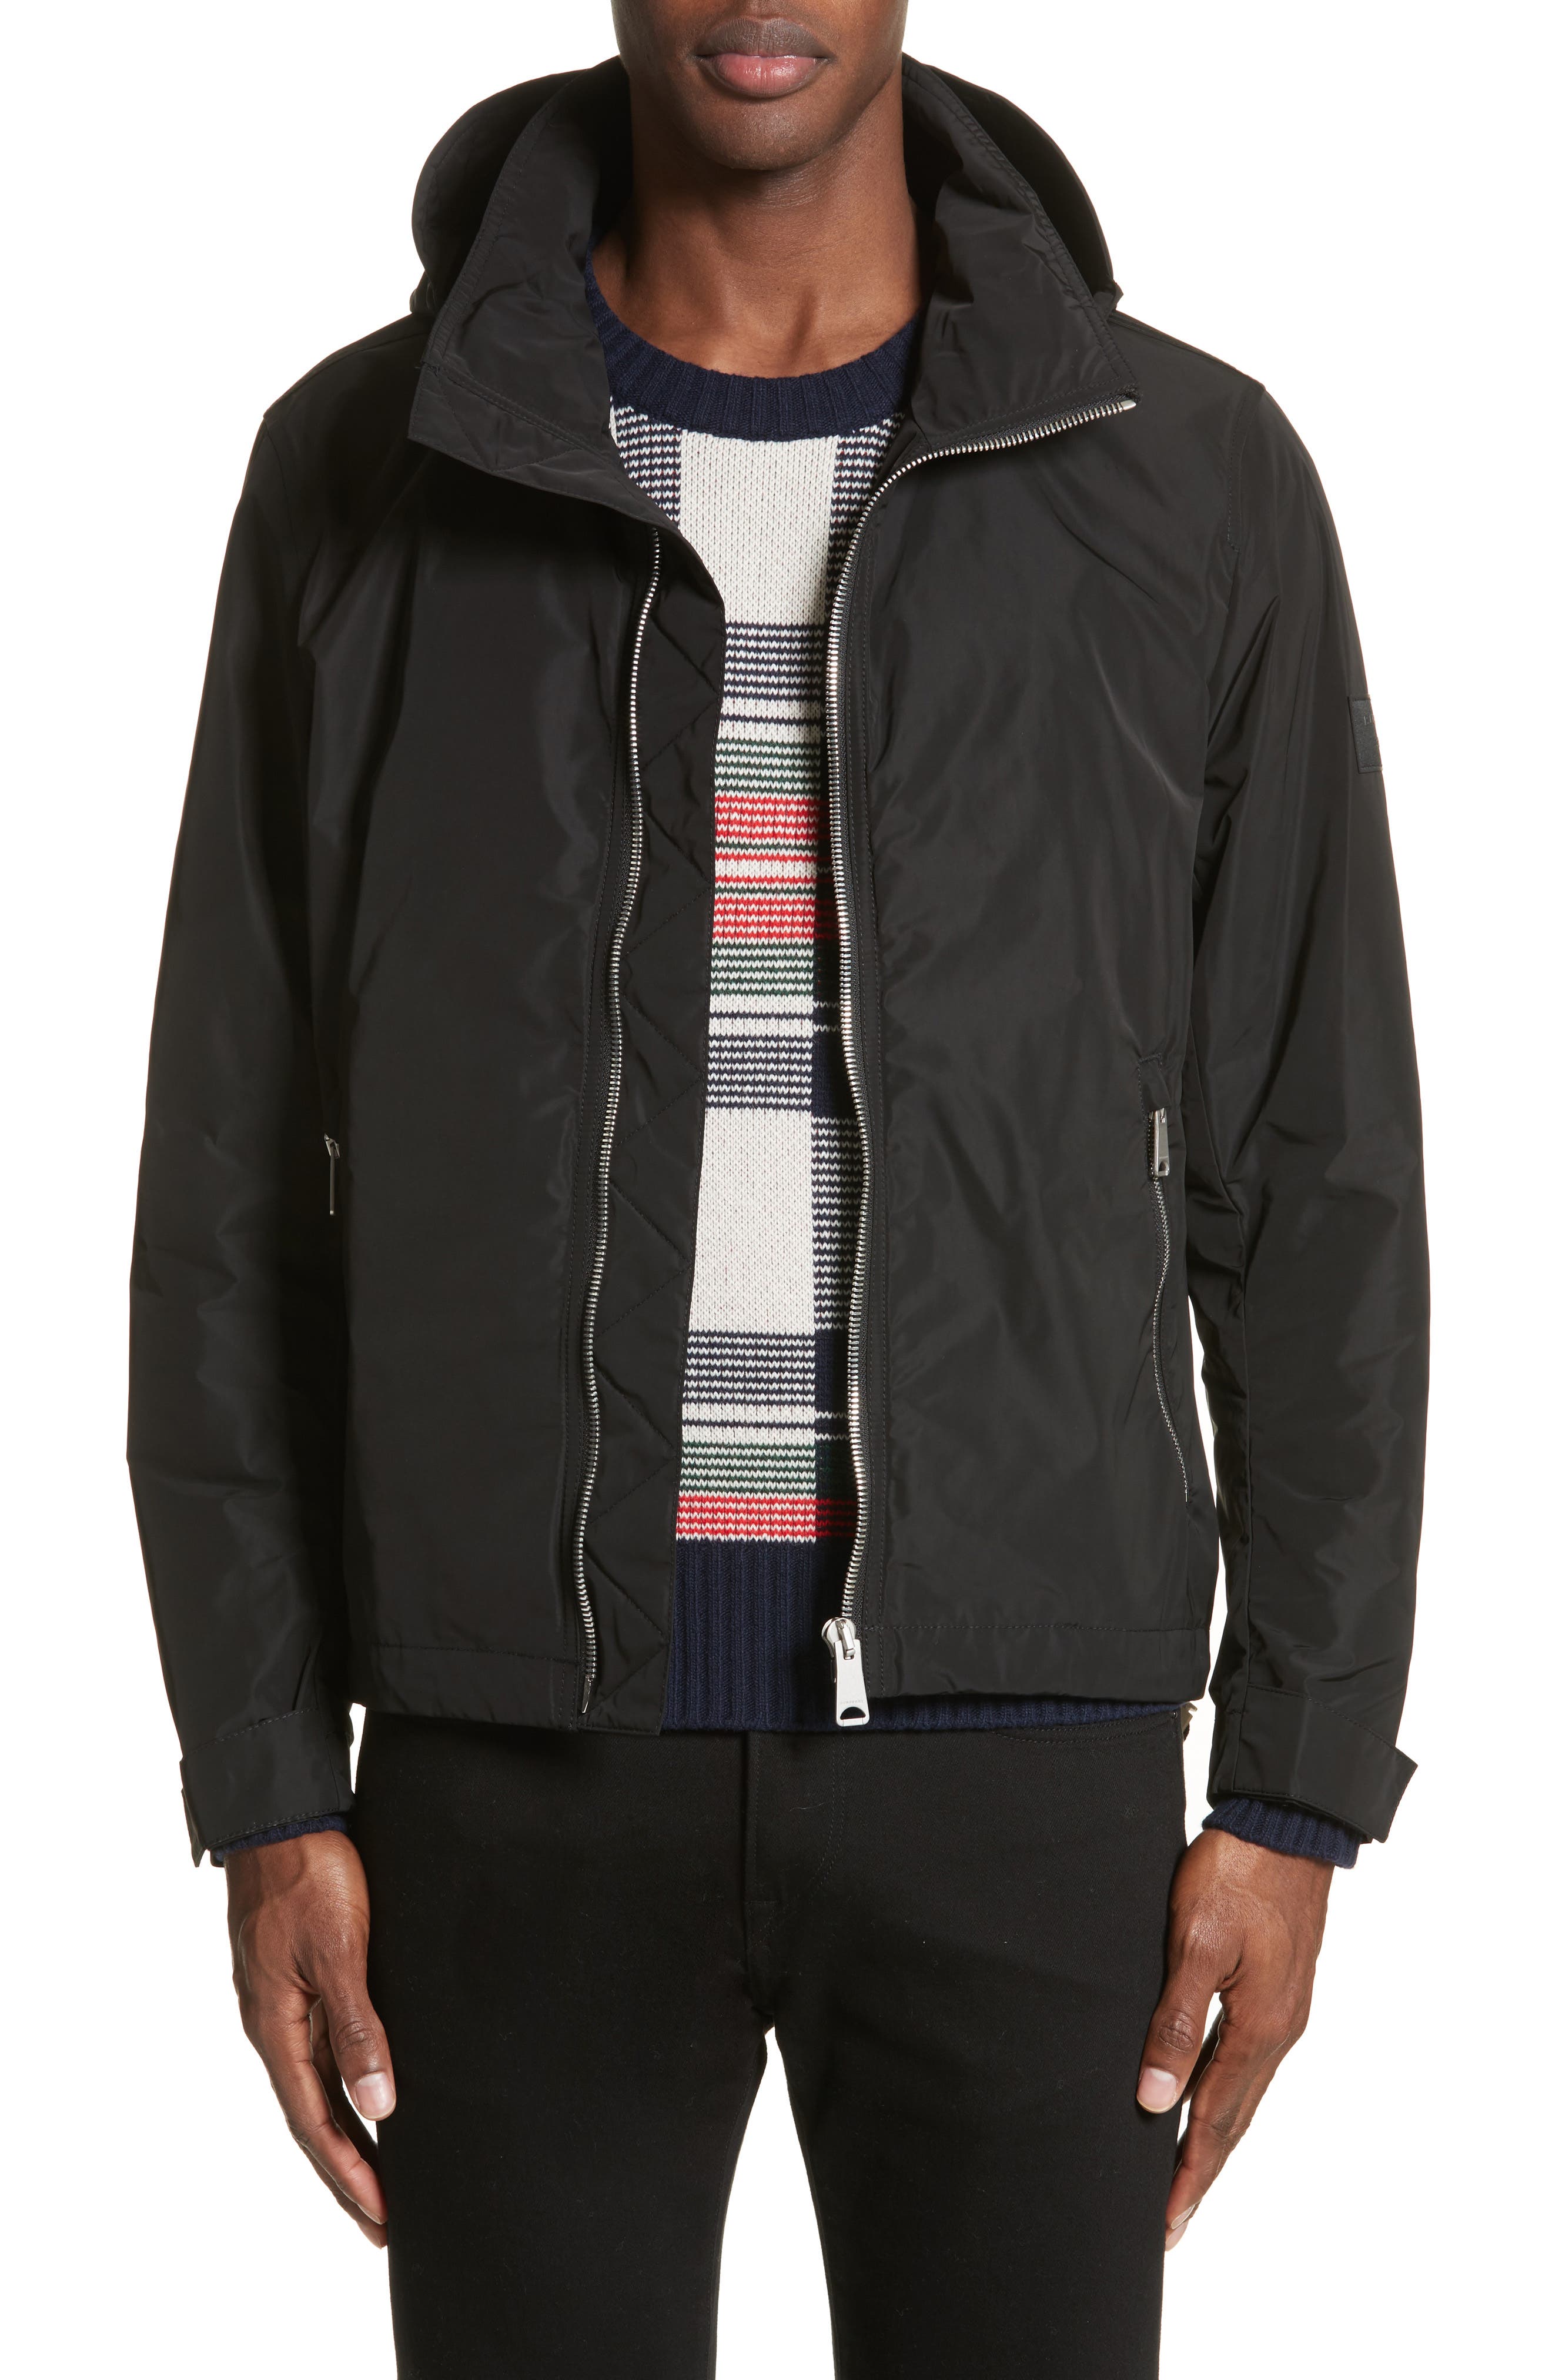 Burberry Hedley Stand Collar Jacket 